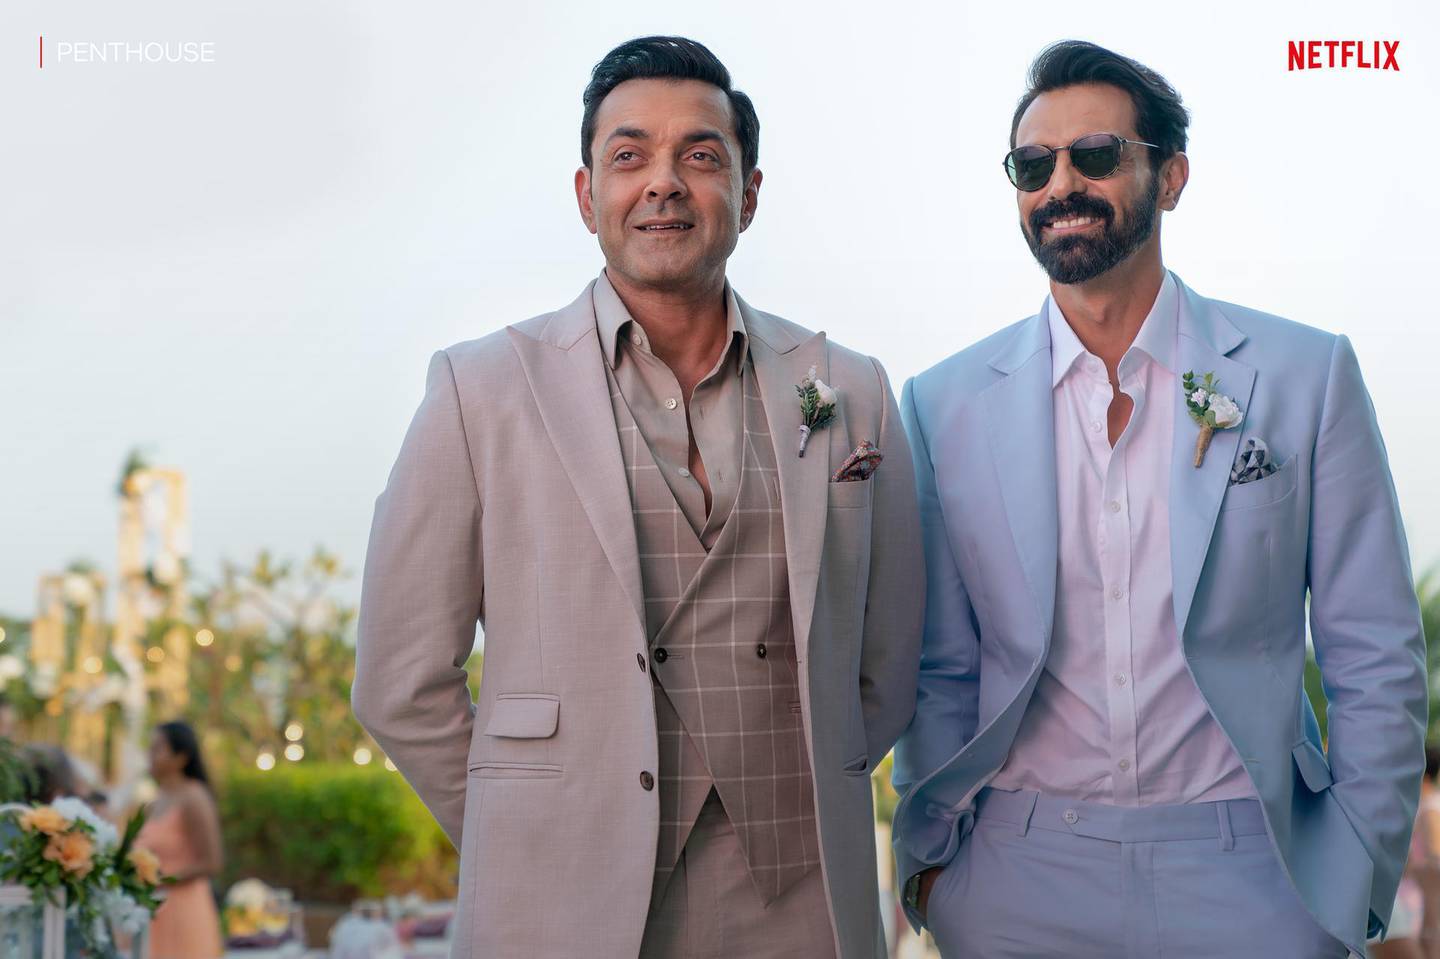 Bobby Deol and Arjun Rampal in 'Penthouse'. Courtesy Netflix 